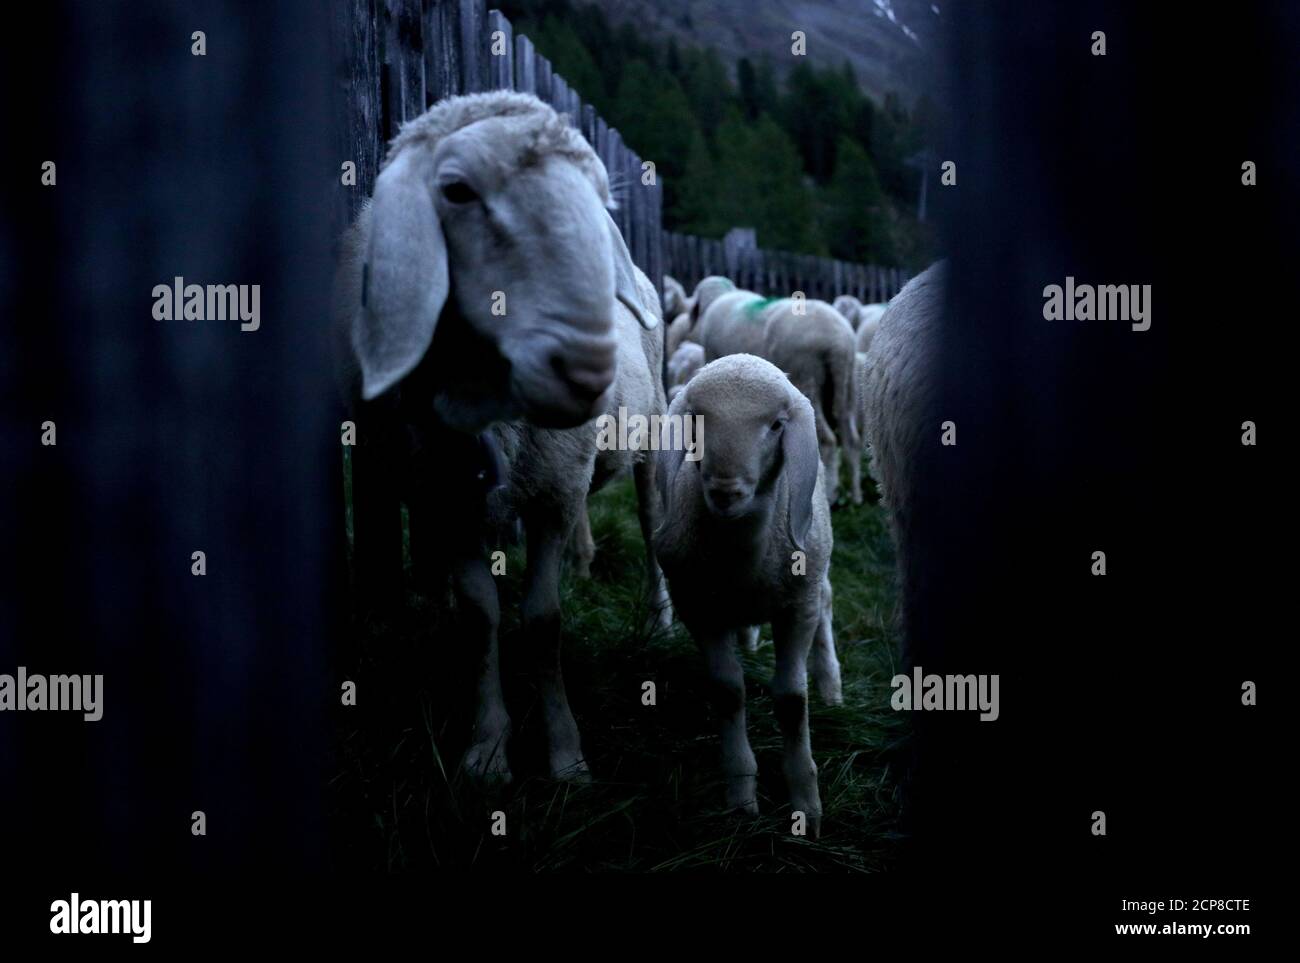 A sheep and a lamb wait inside an enclosure during sunrise at 2,011 meters above sea level in the village of Kurzras (Maso Corto) in the autonomous region of South Tyrol, Italy, June 9, 2018. Picture taken June 9, 2018. REUTERS/Lisi Niesner Stock Photo